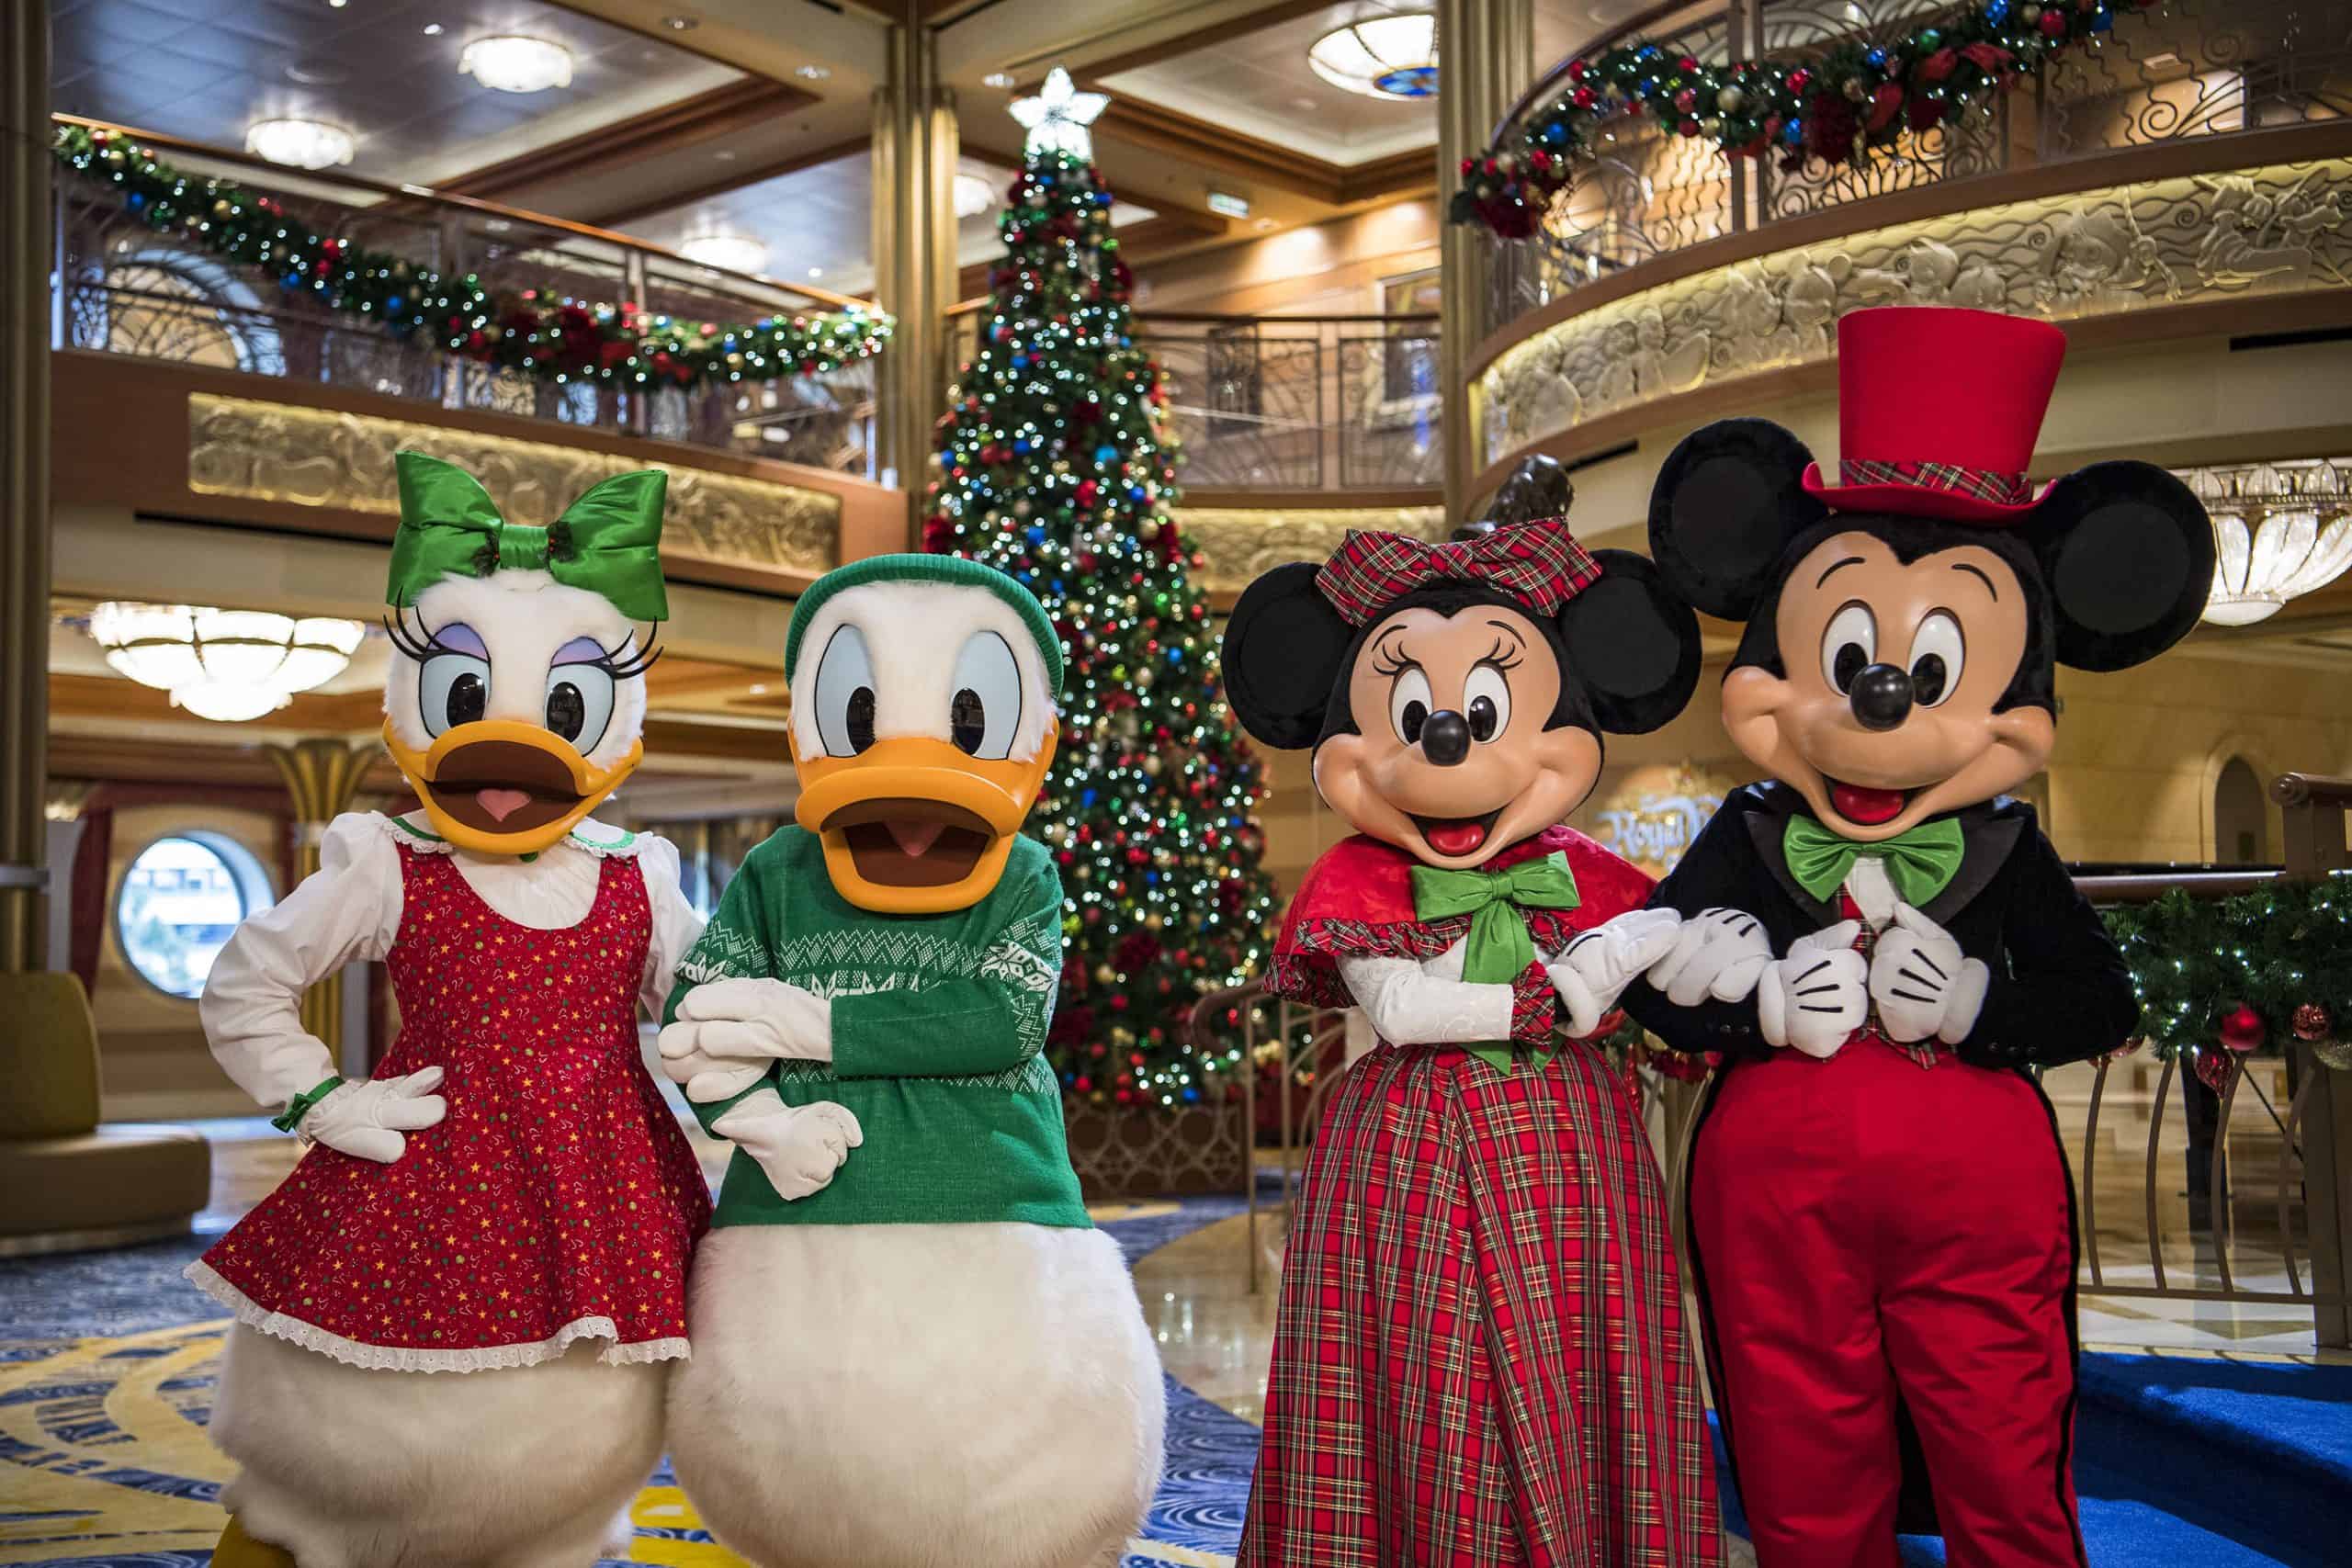  Disney Cruise Line Holidays Characters